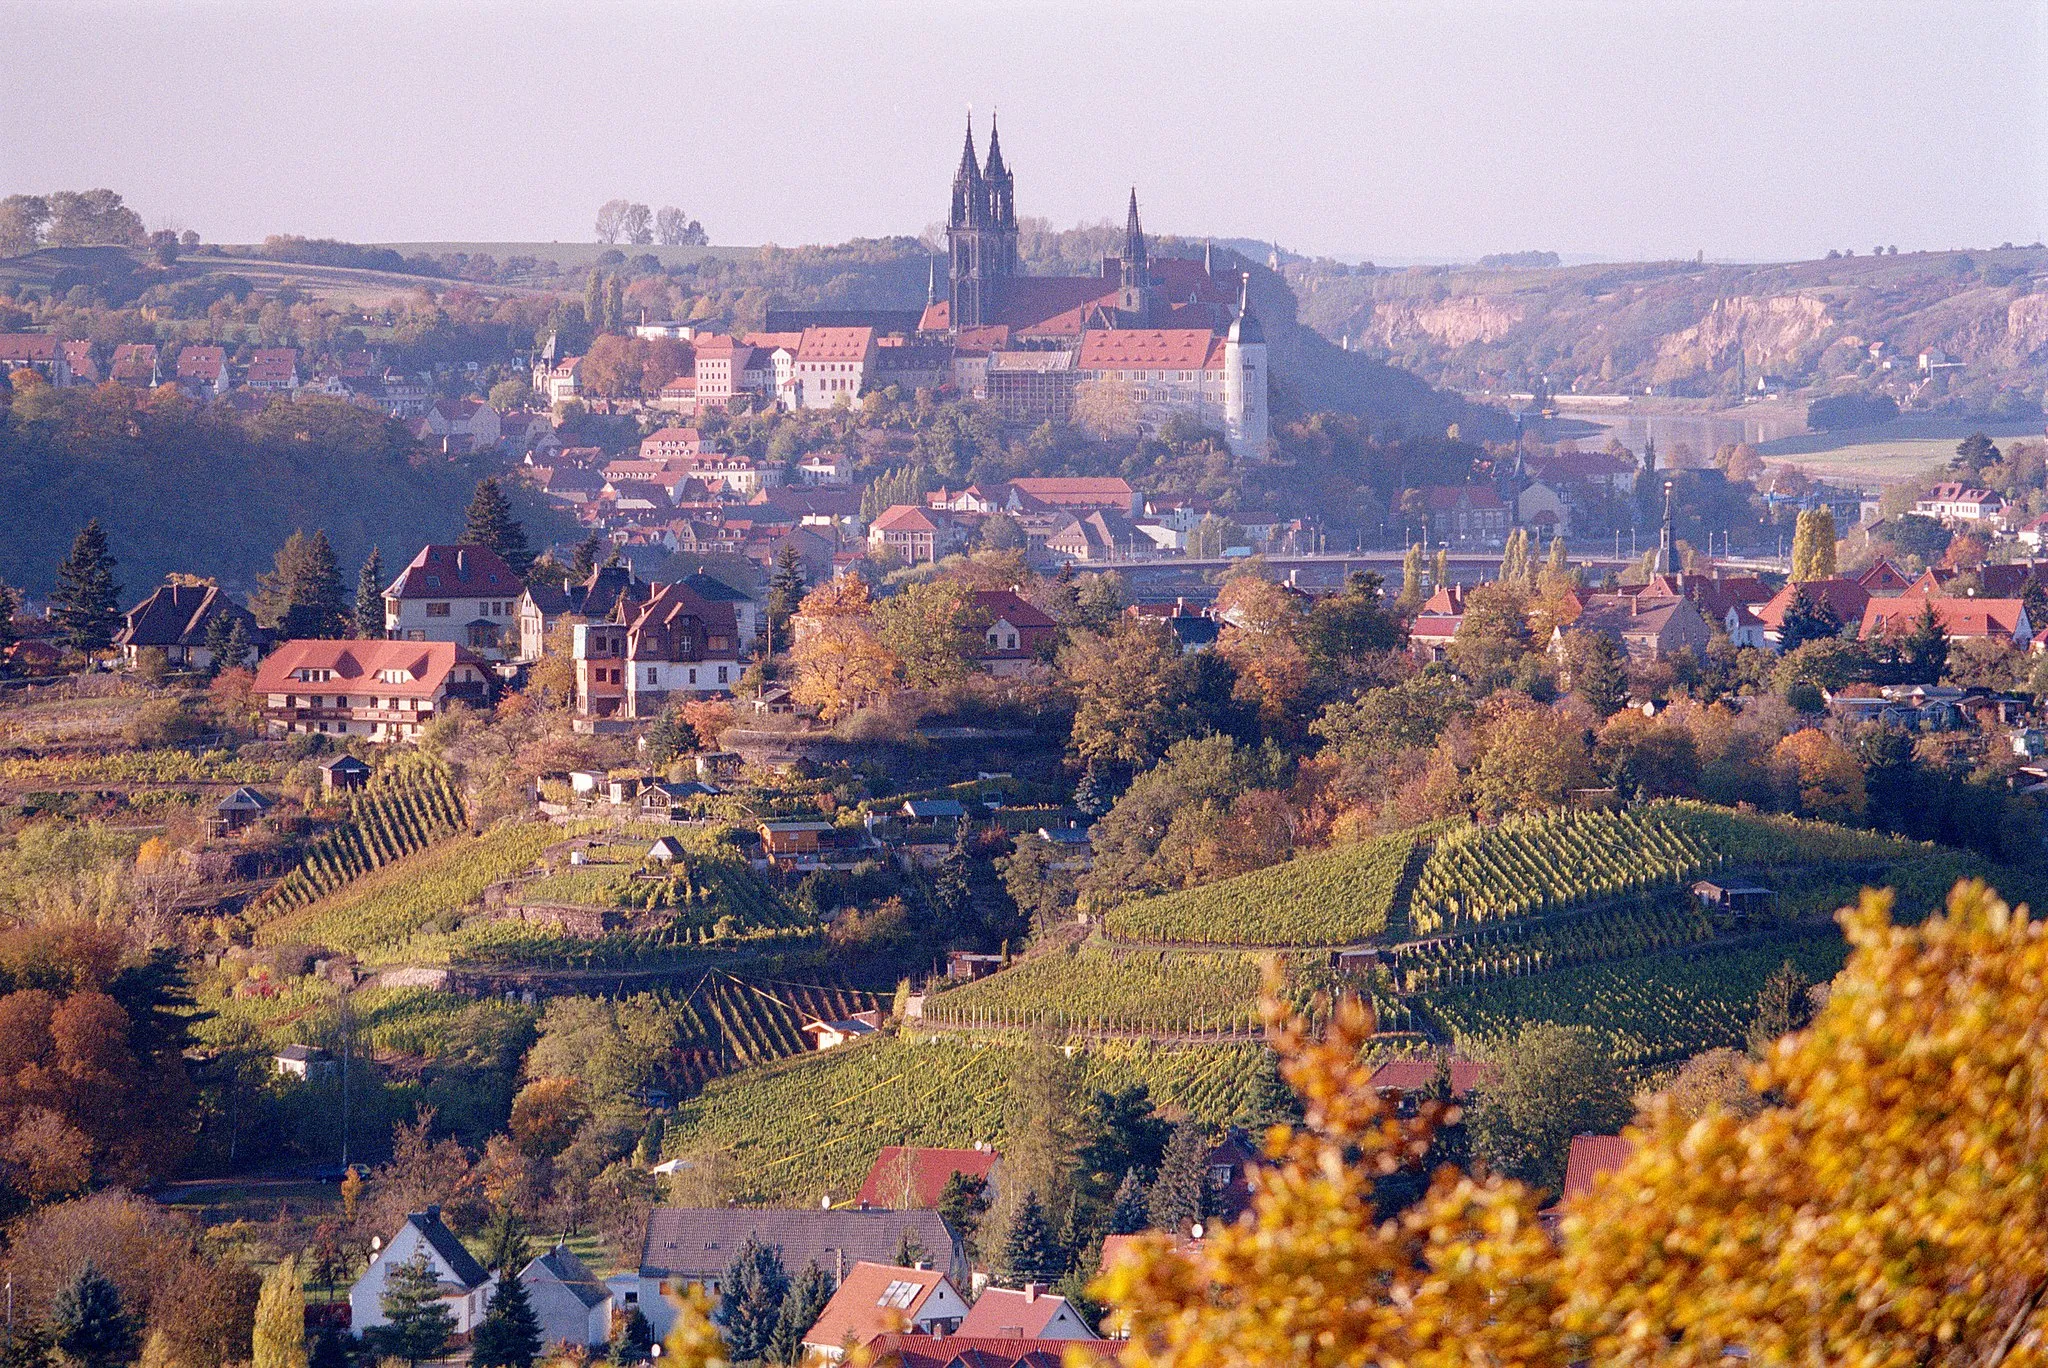 Photo showing: Meißen at the river Elbe, a city in germany near Dresden in Saxony
picture taken from a viewpoint called "Juchhöh" in the nearby mountains "Spaargebirge"
cathedral of Meißen and vineyards at the hills